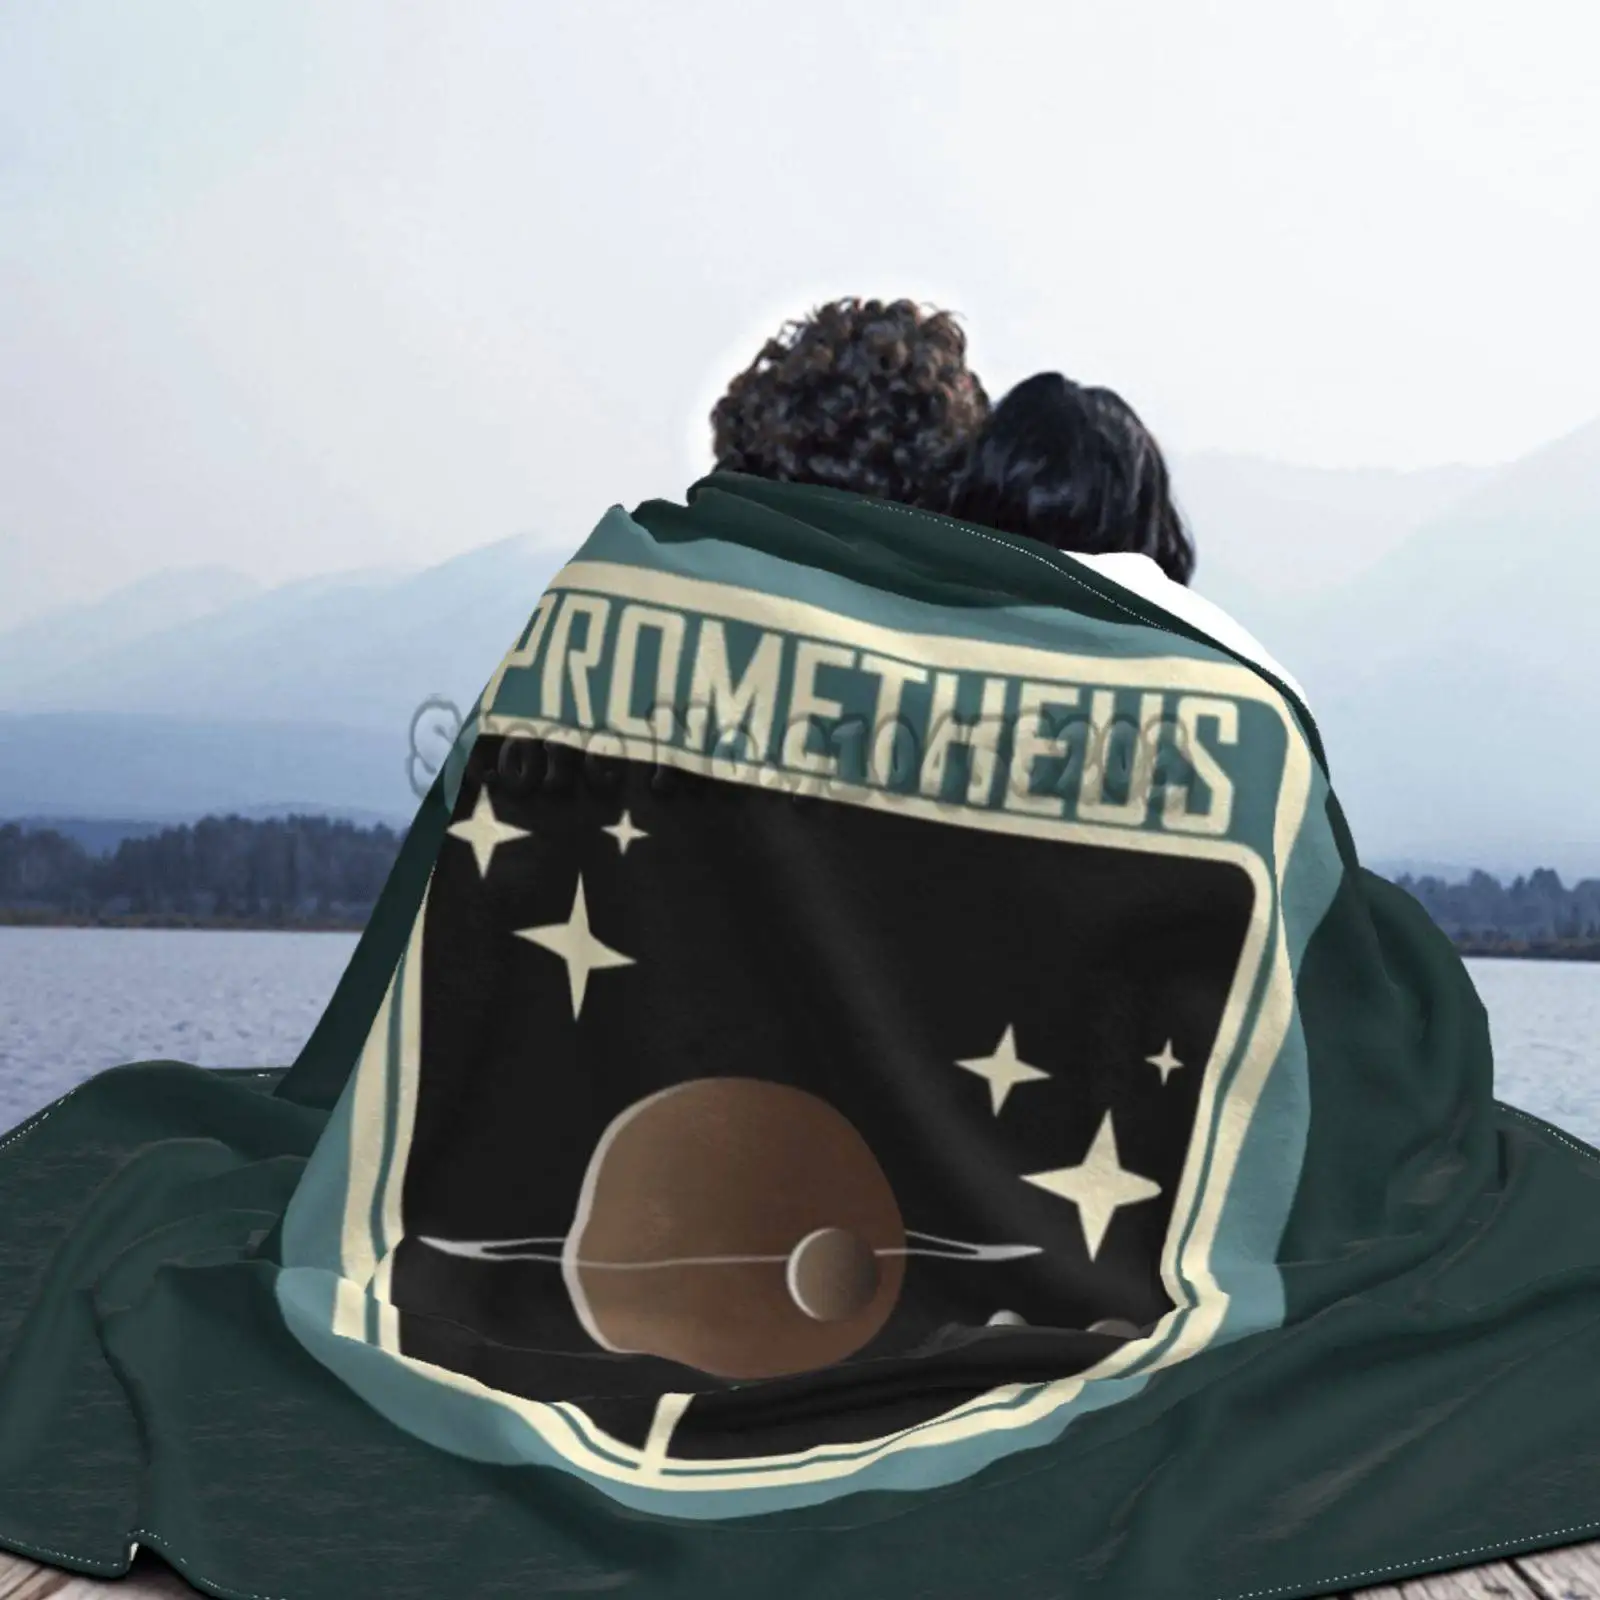 Prometheus Expedition Bade Throw And Blanket Custom Print Flannel Soft Blanket  Lv 426 Prometheus Space Promethuis Riply Ripley - Blanket - AliExpress